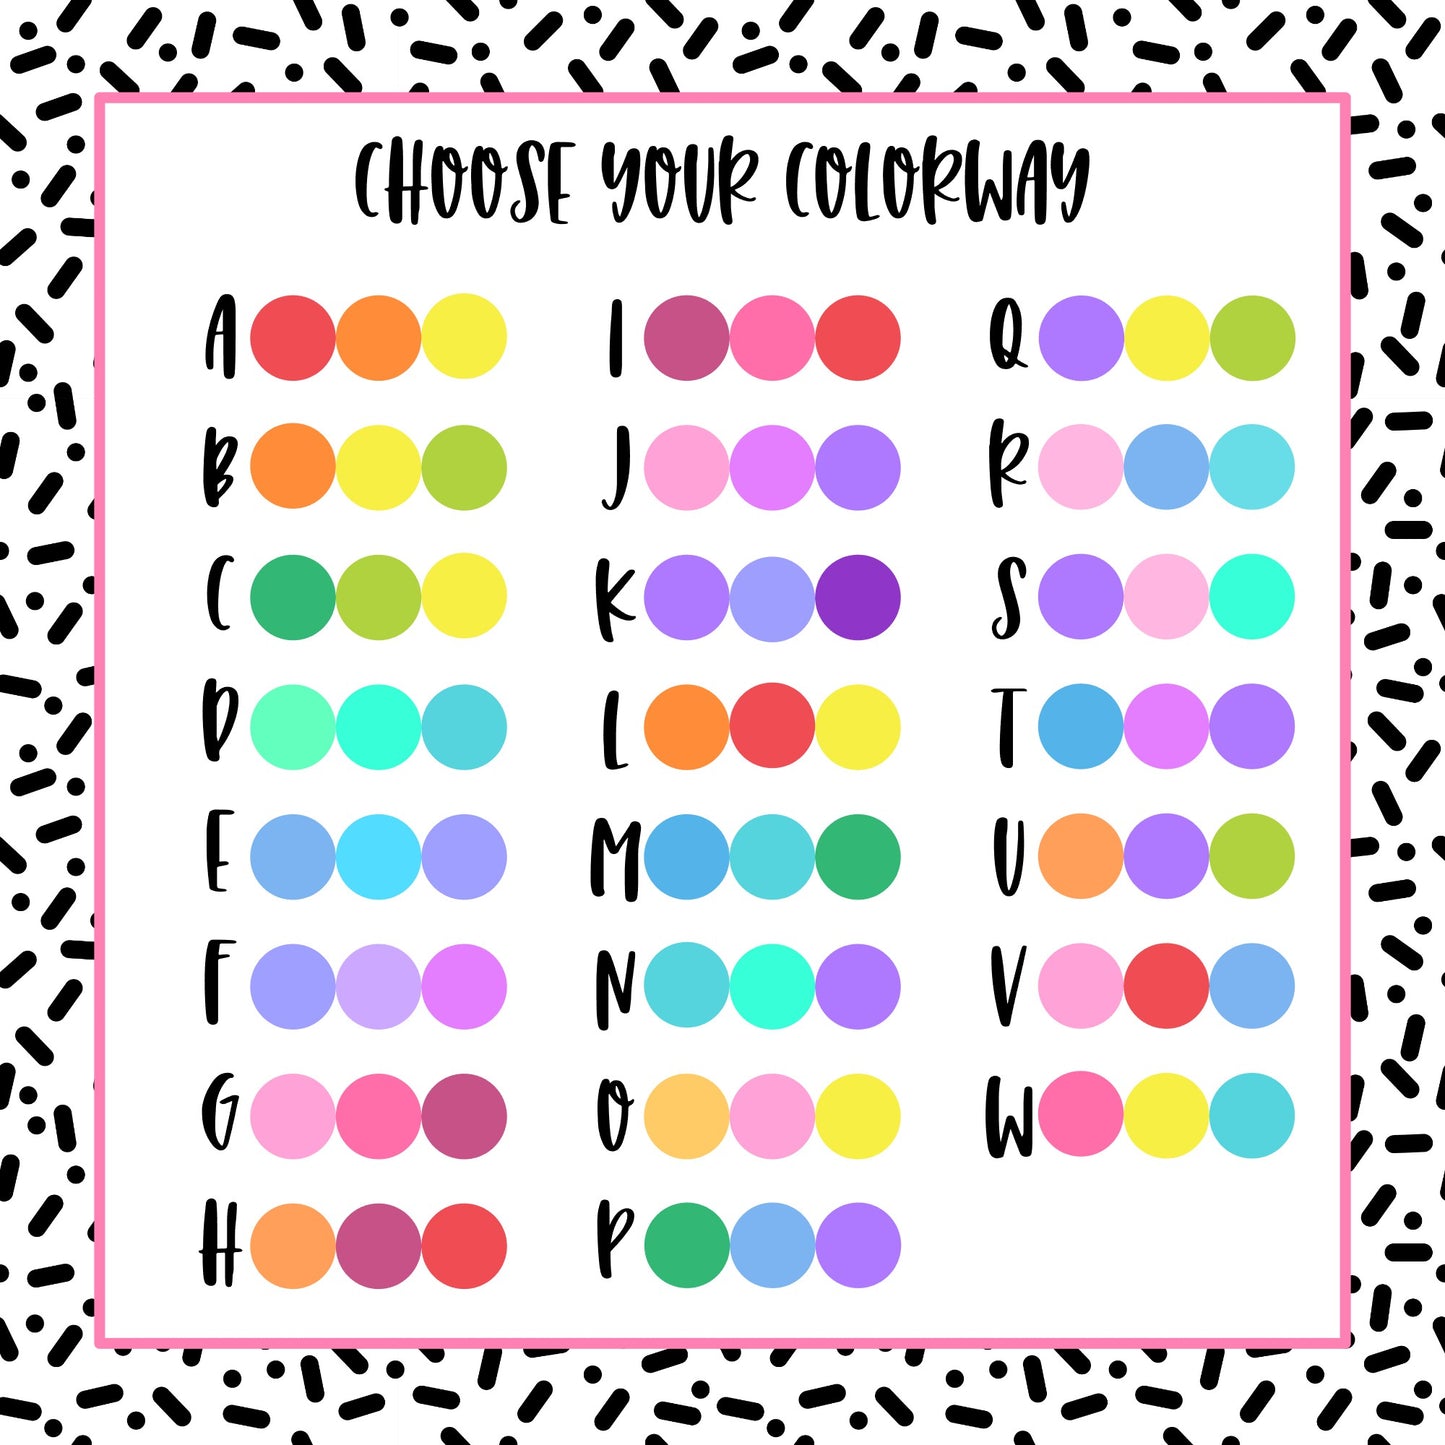 Bright Grid Offset Boxes - 23 color options